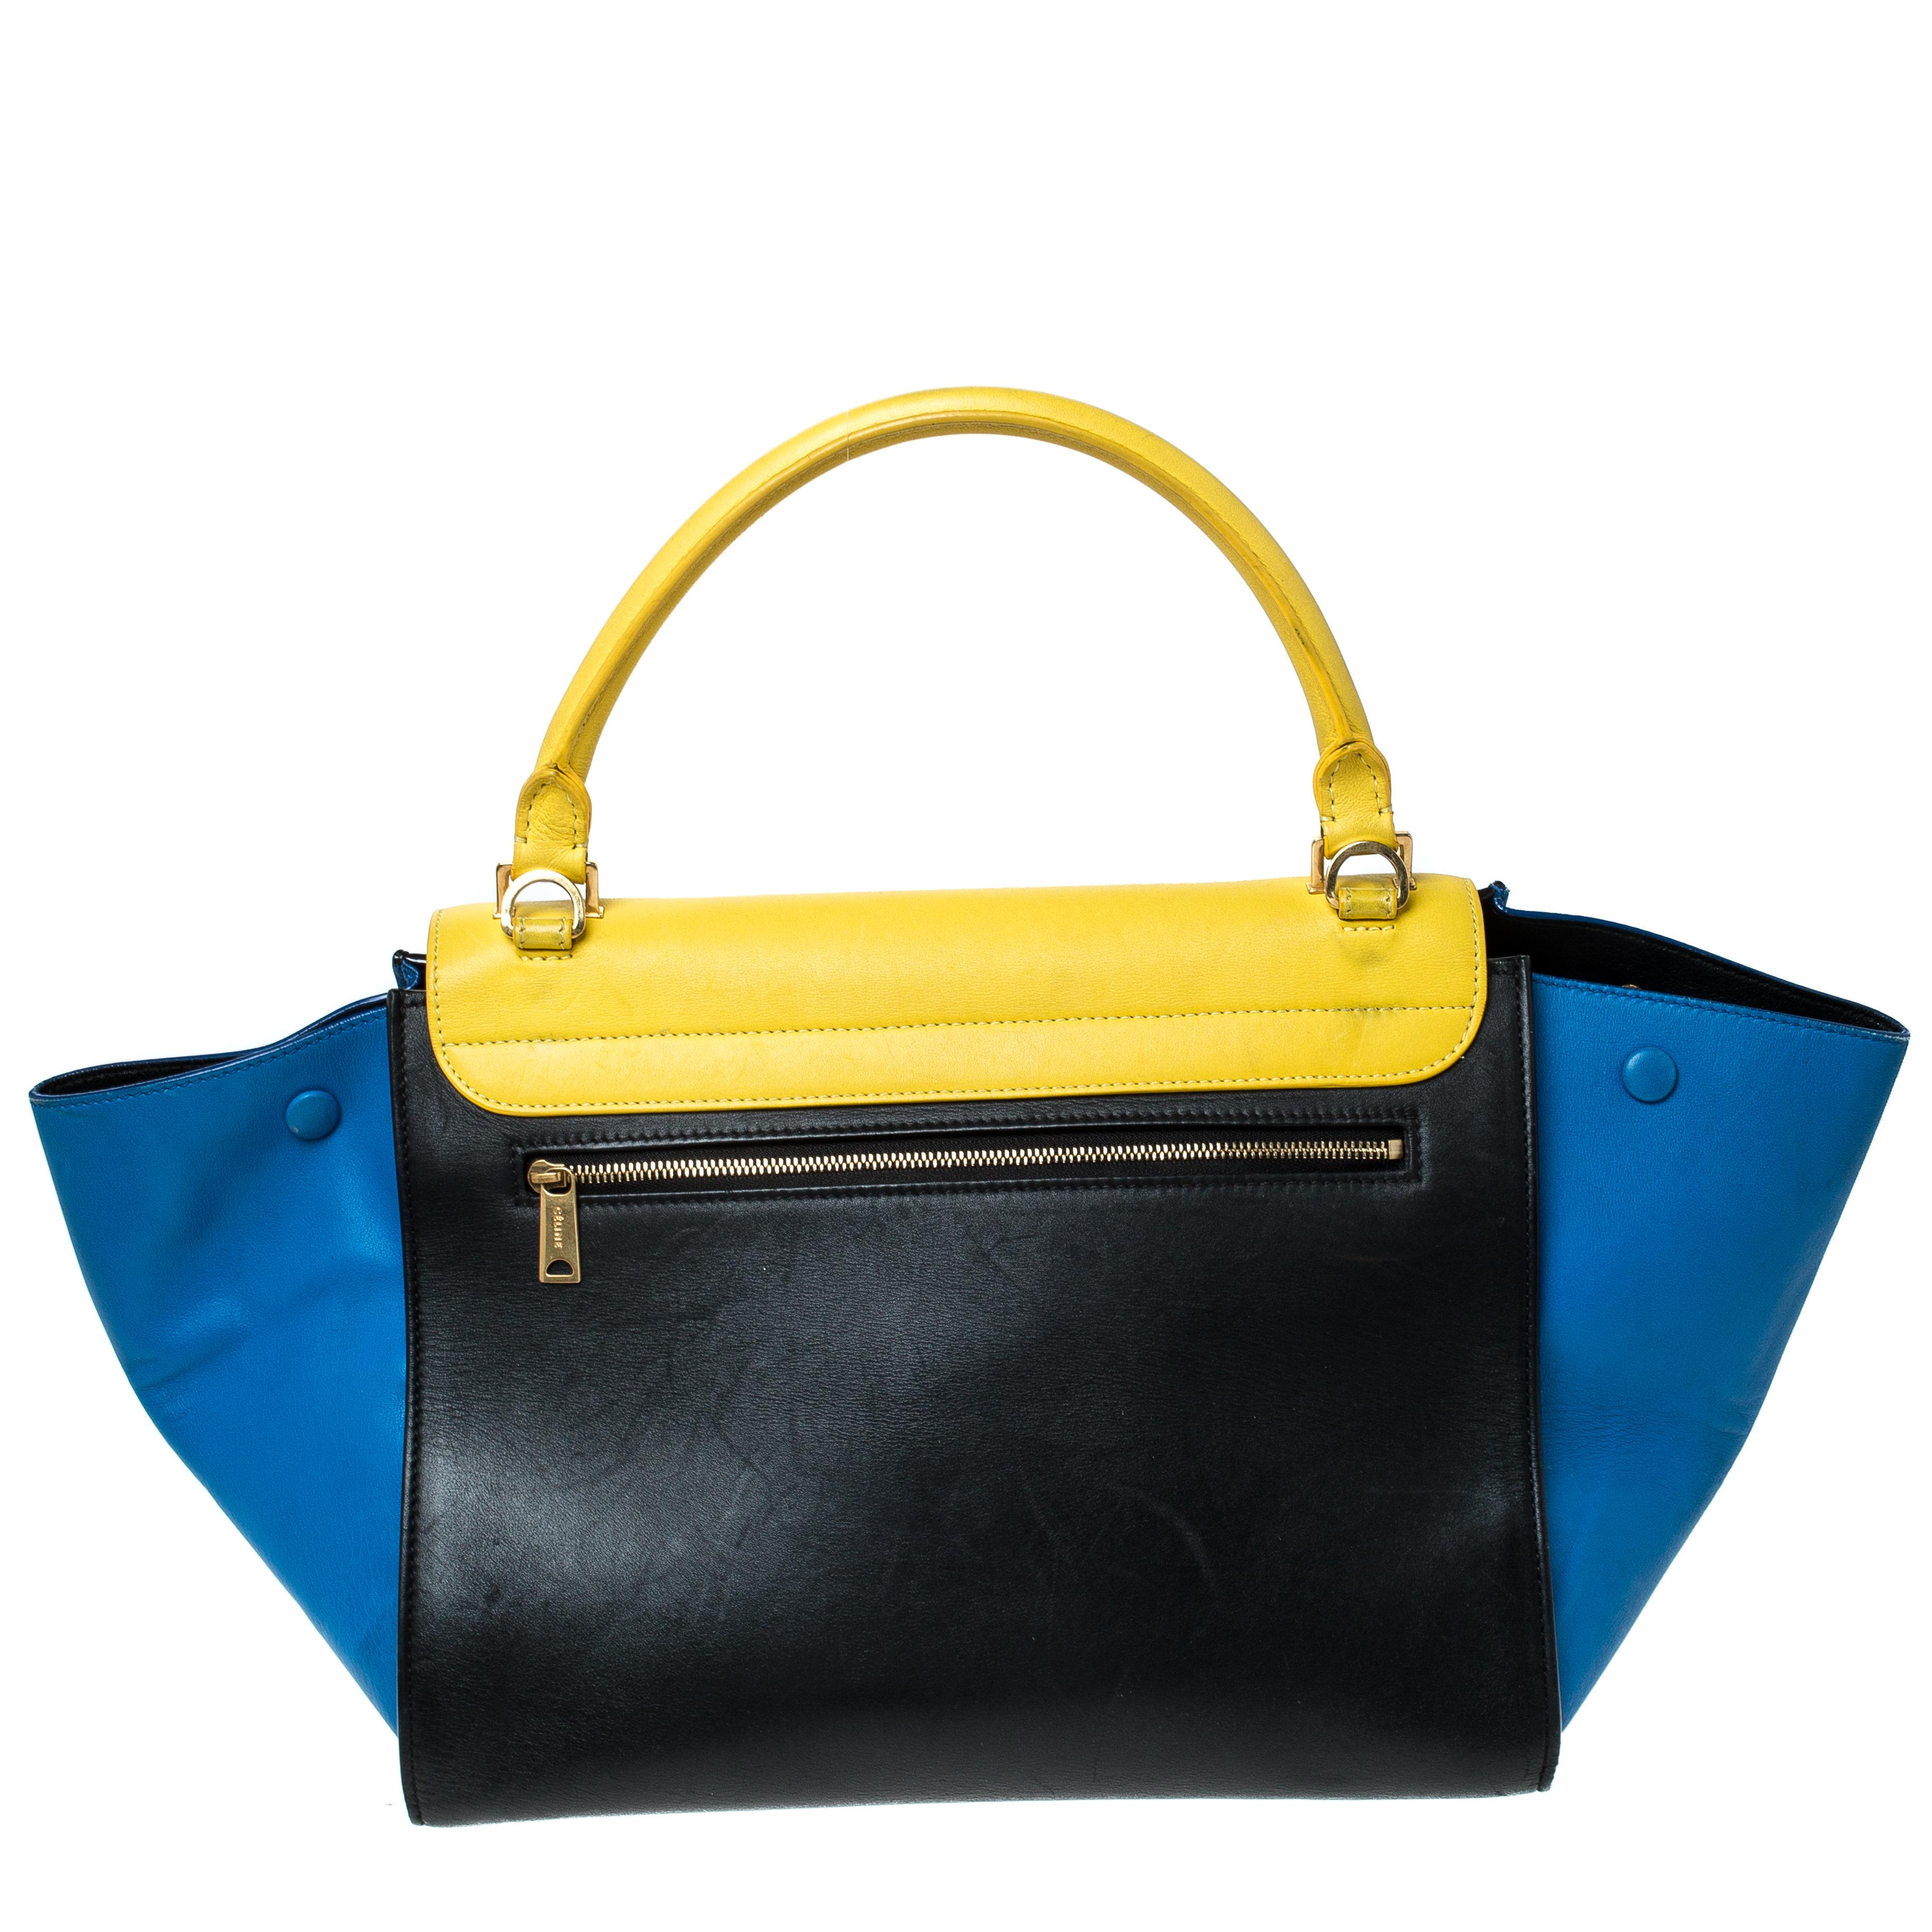 In every stride, swing, and twirl, your audience will gasp in admiration at the beautiful sight of this Celine bag. Crafted from leather in Italy, the bag has a style that will catch glances from a mile. It has been designed with the signature